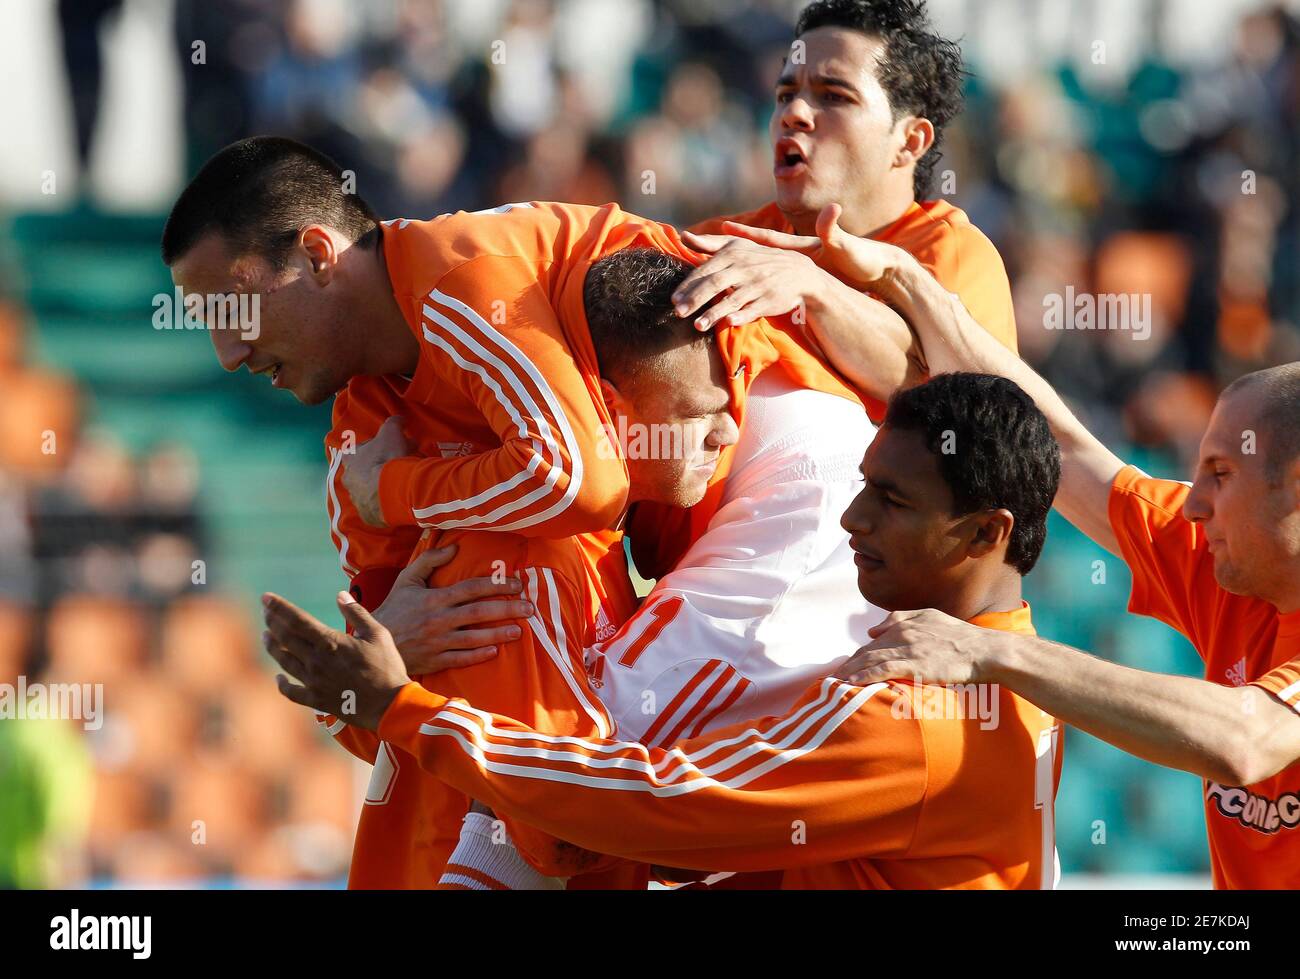 Litex Lovech's Wilfred Niflore (2nd L) celebrates with his team mates after  scoring against Lokomotiv Mezdra during their Bulgarian League soccer match  in the town of Lovetch, some 150km (93 miles) east